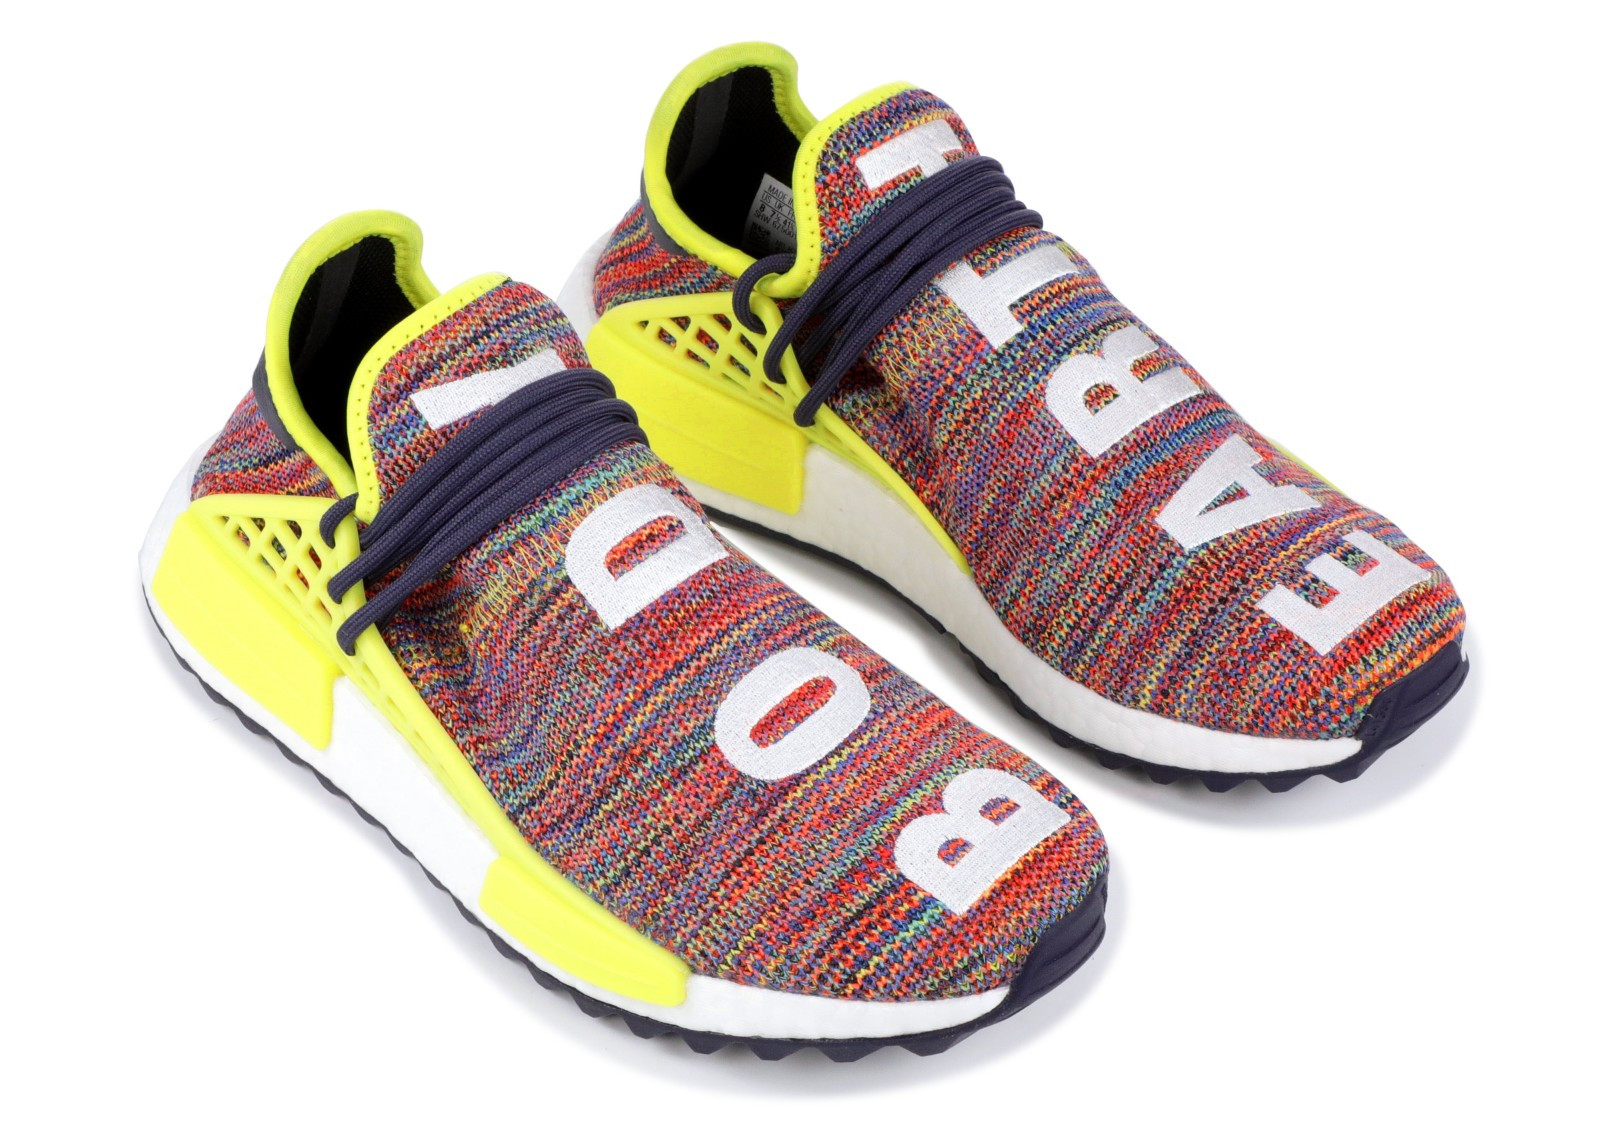 PW HUMAN RACE NMD TR "MULTI-COLOR" image 4